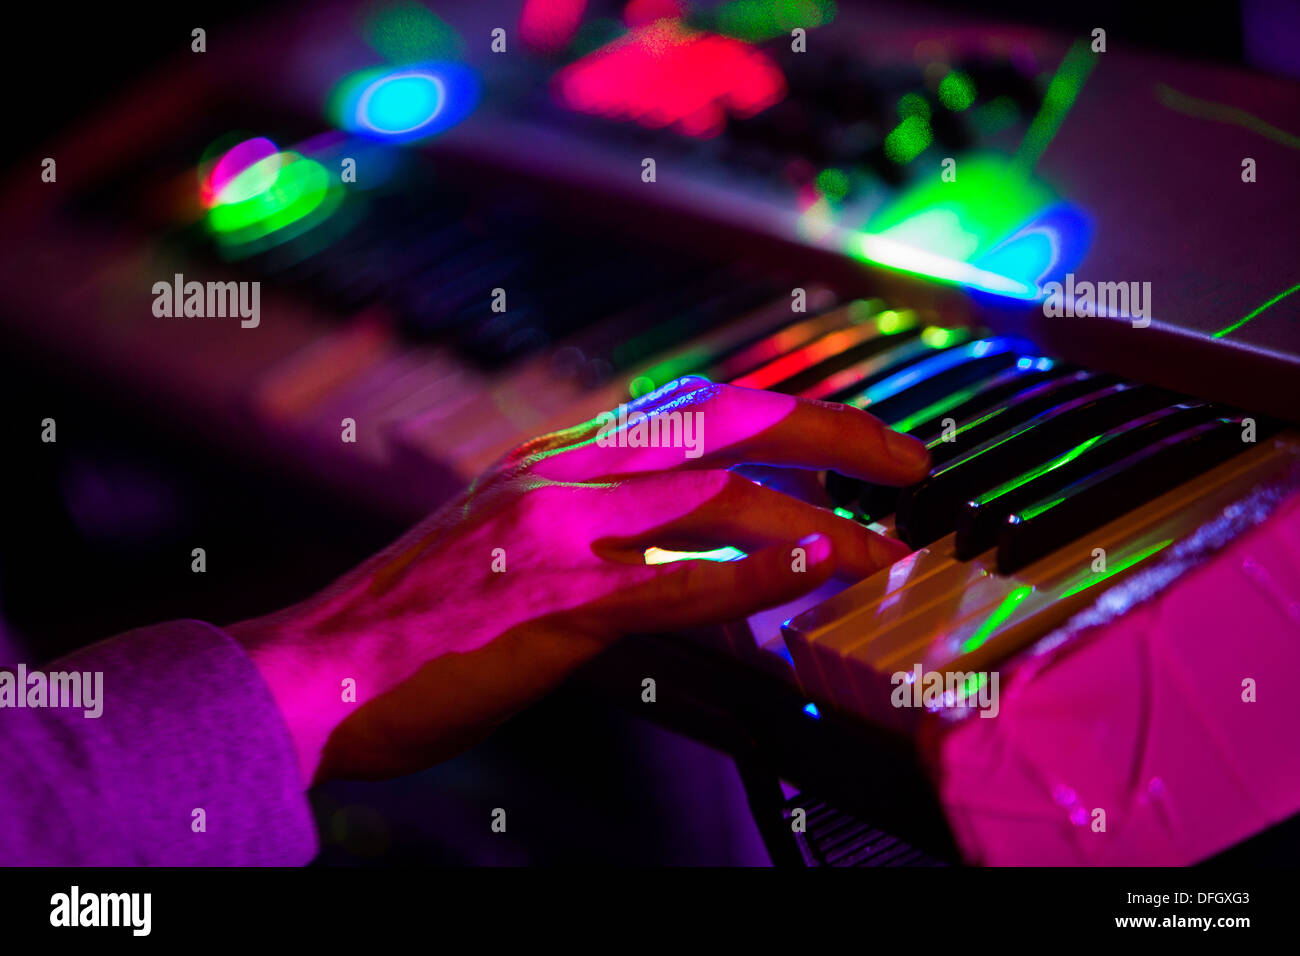 Stage lights on a keyboard during a concert. Stock Photo